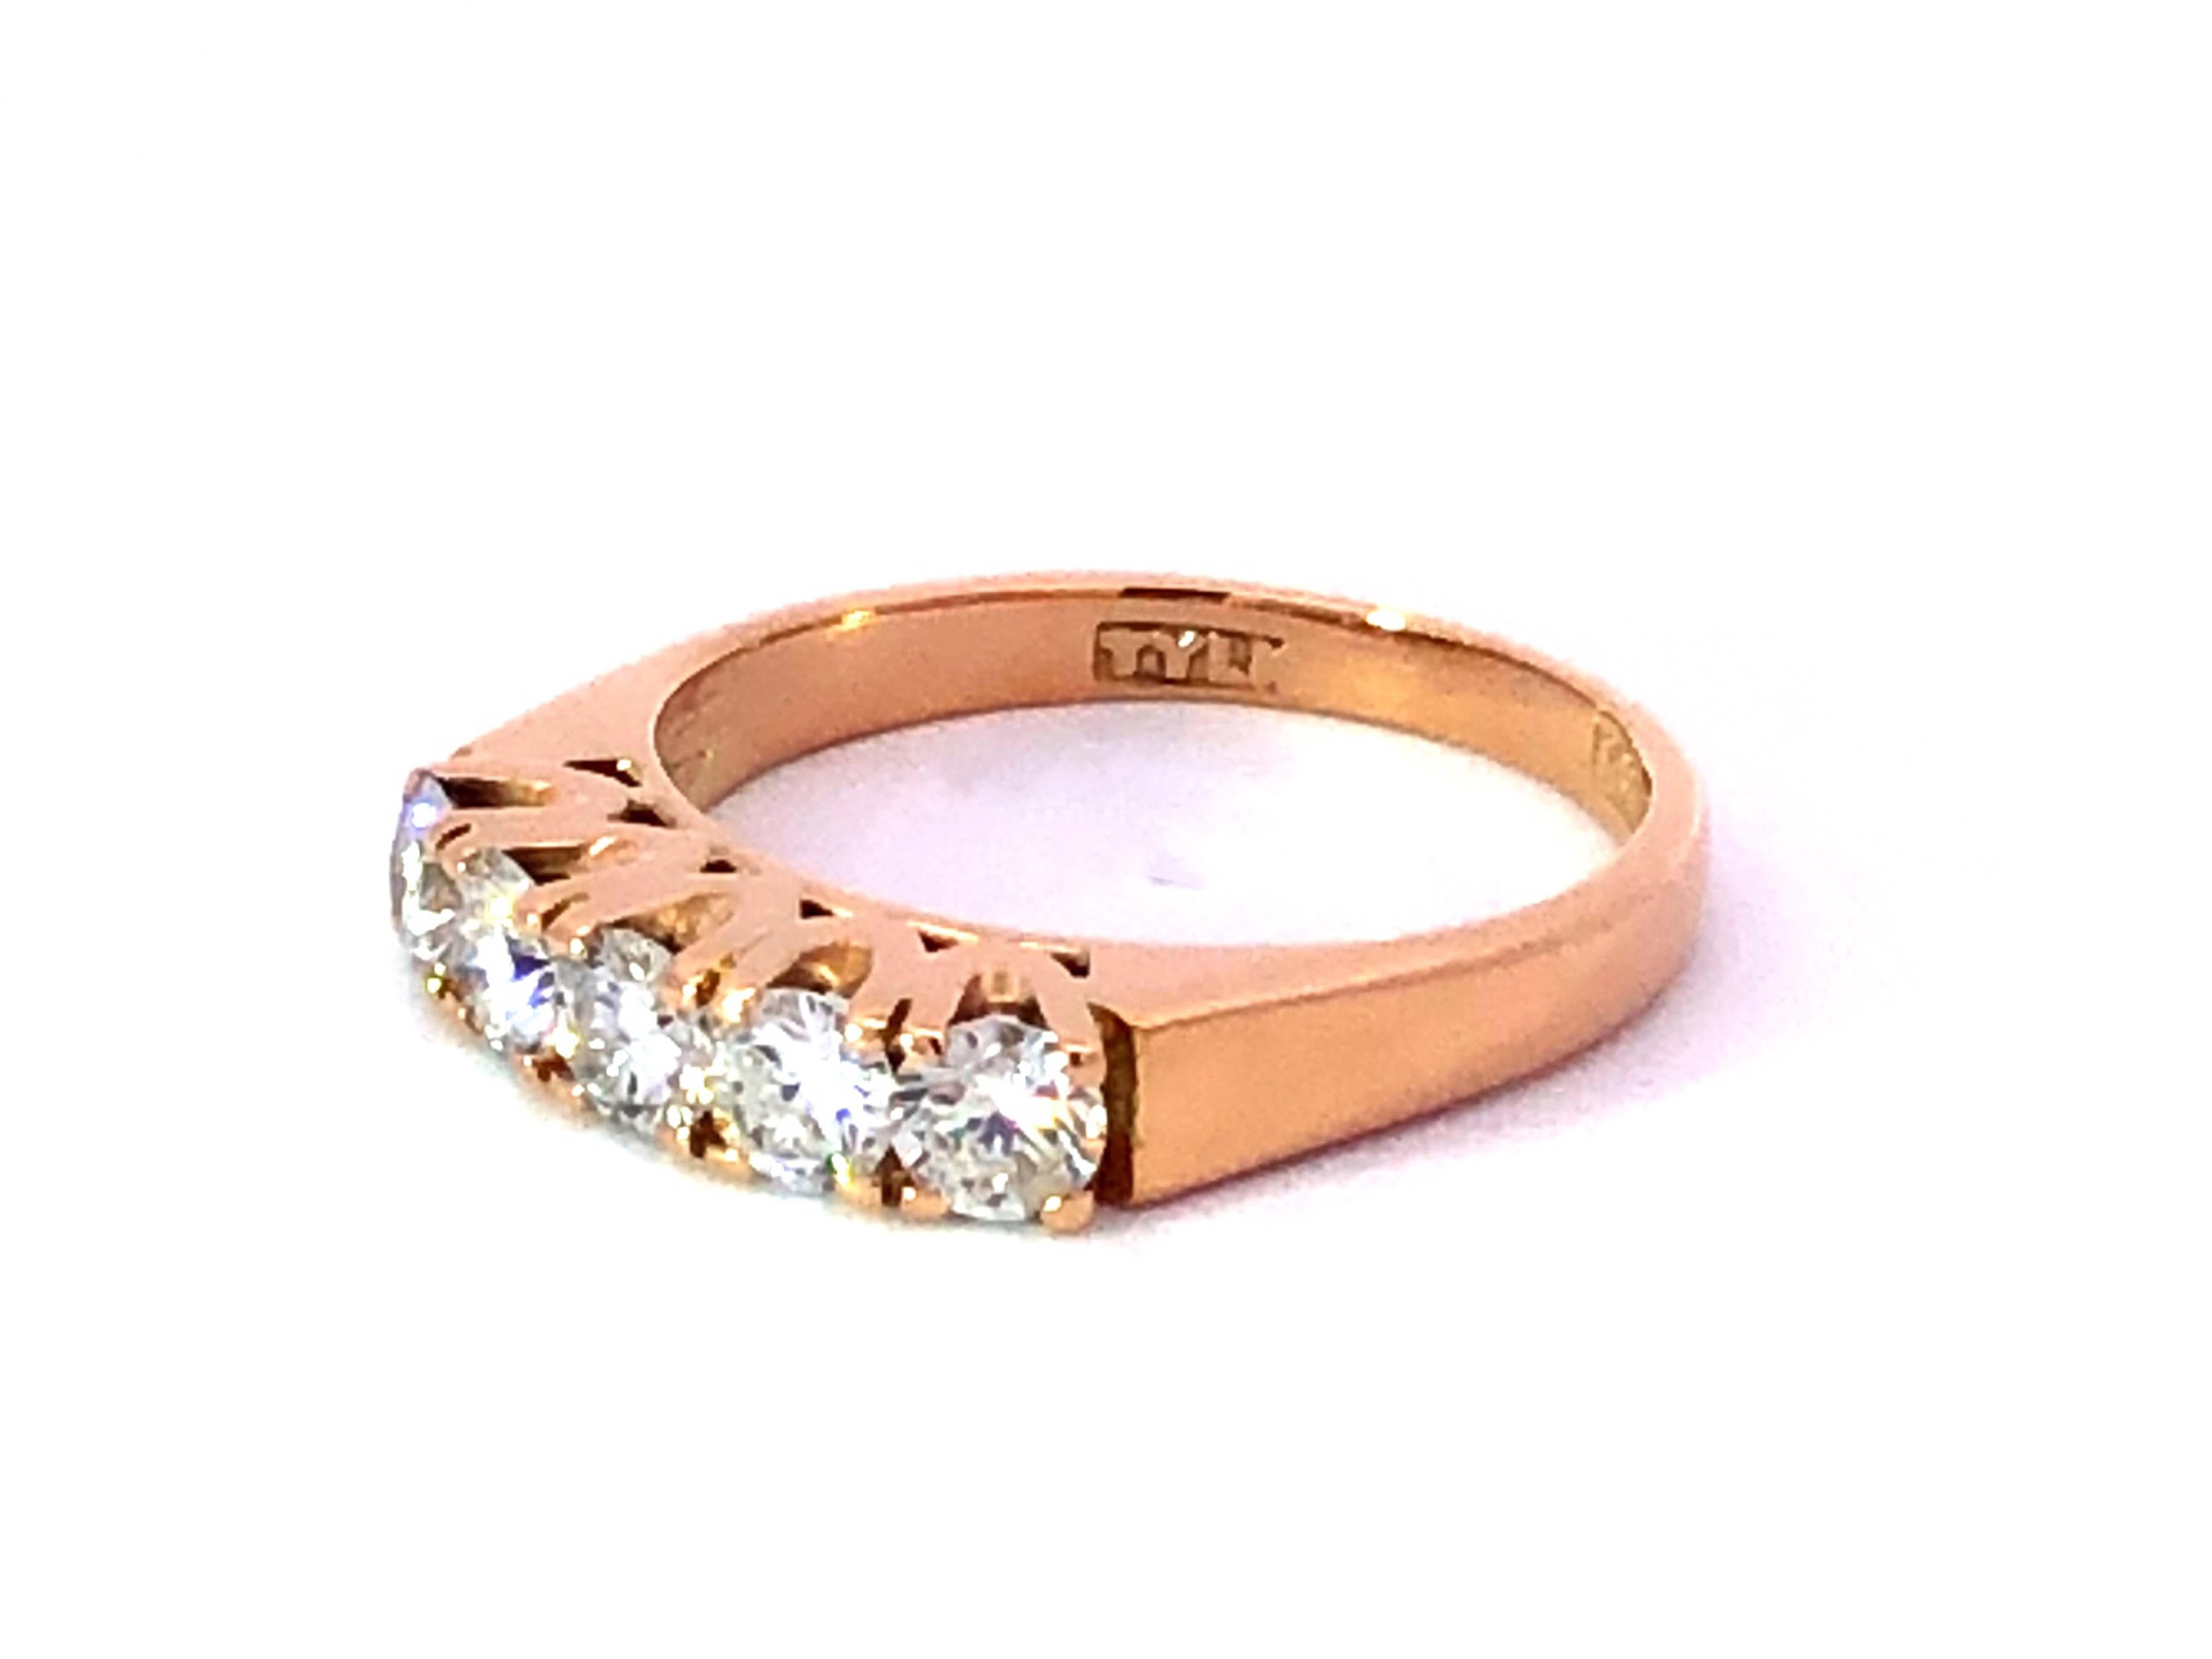 5 Diamond 14K Yellow Gold Ring In Excellent Condition For Sale In Honolulu, HI